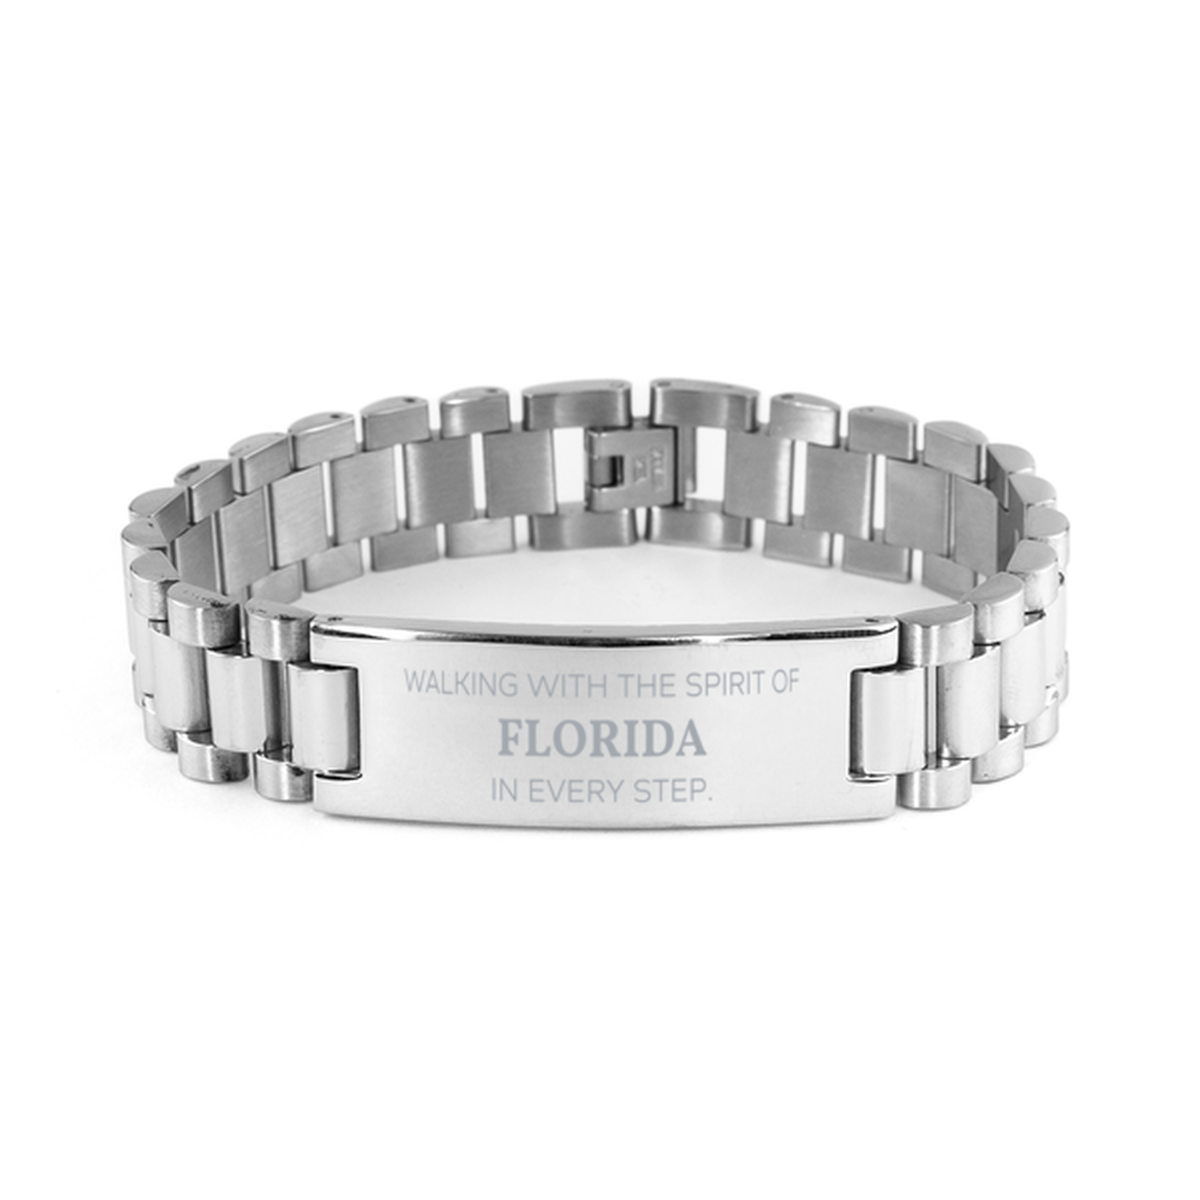 Florida Gifts, Walking with the spirit, Love Florida Birthday Christmas Ladder Stainless Steel Bracelet For Florida People, Men, Women, Friends